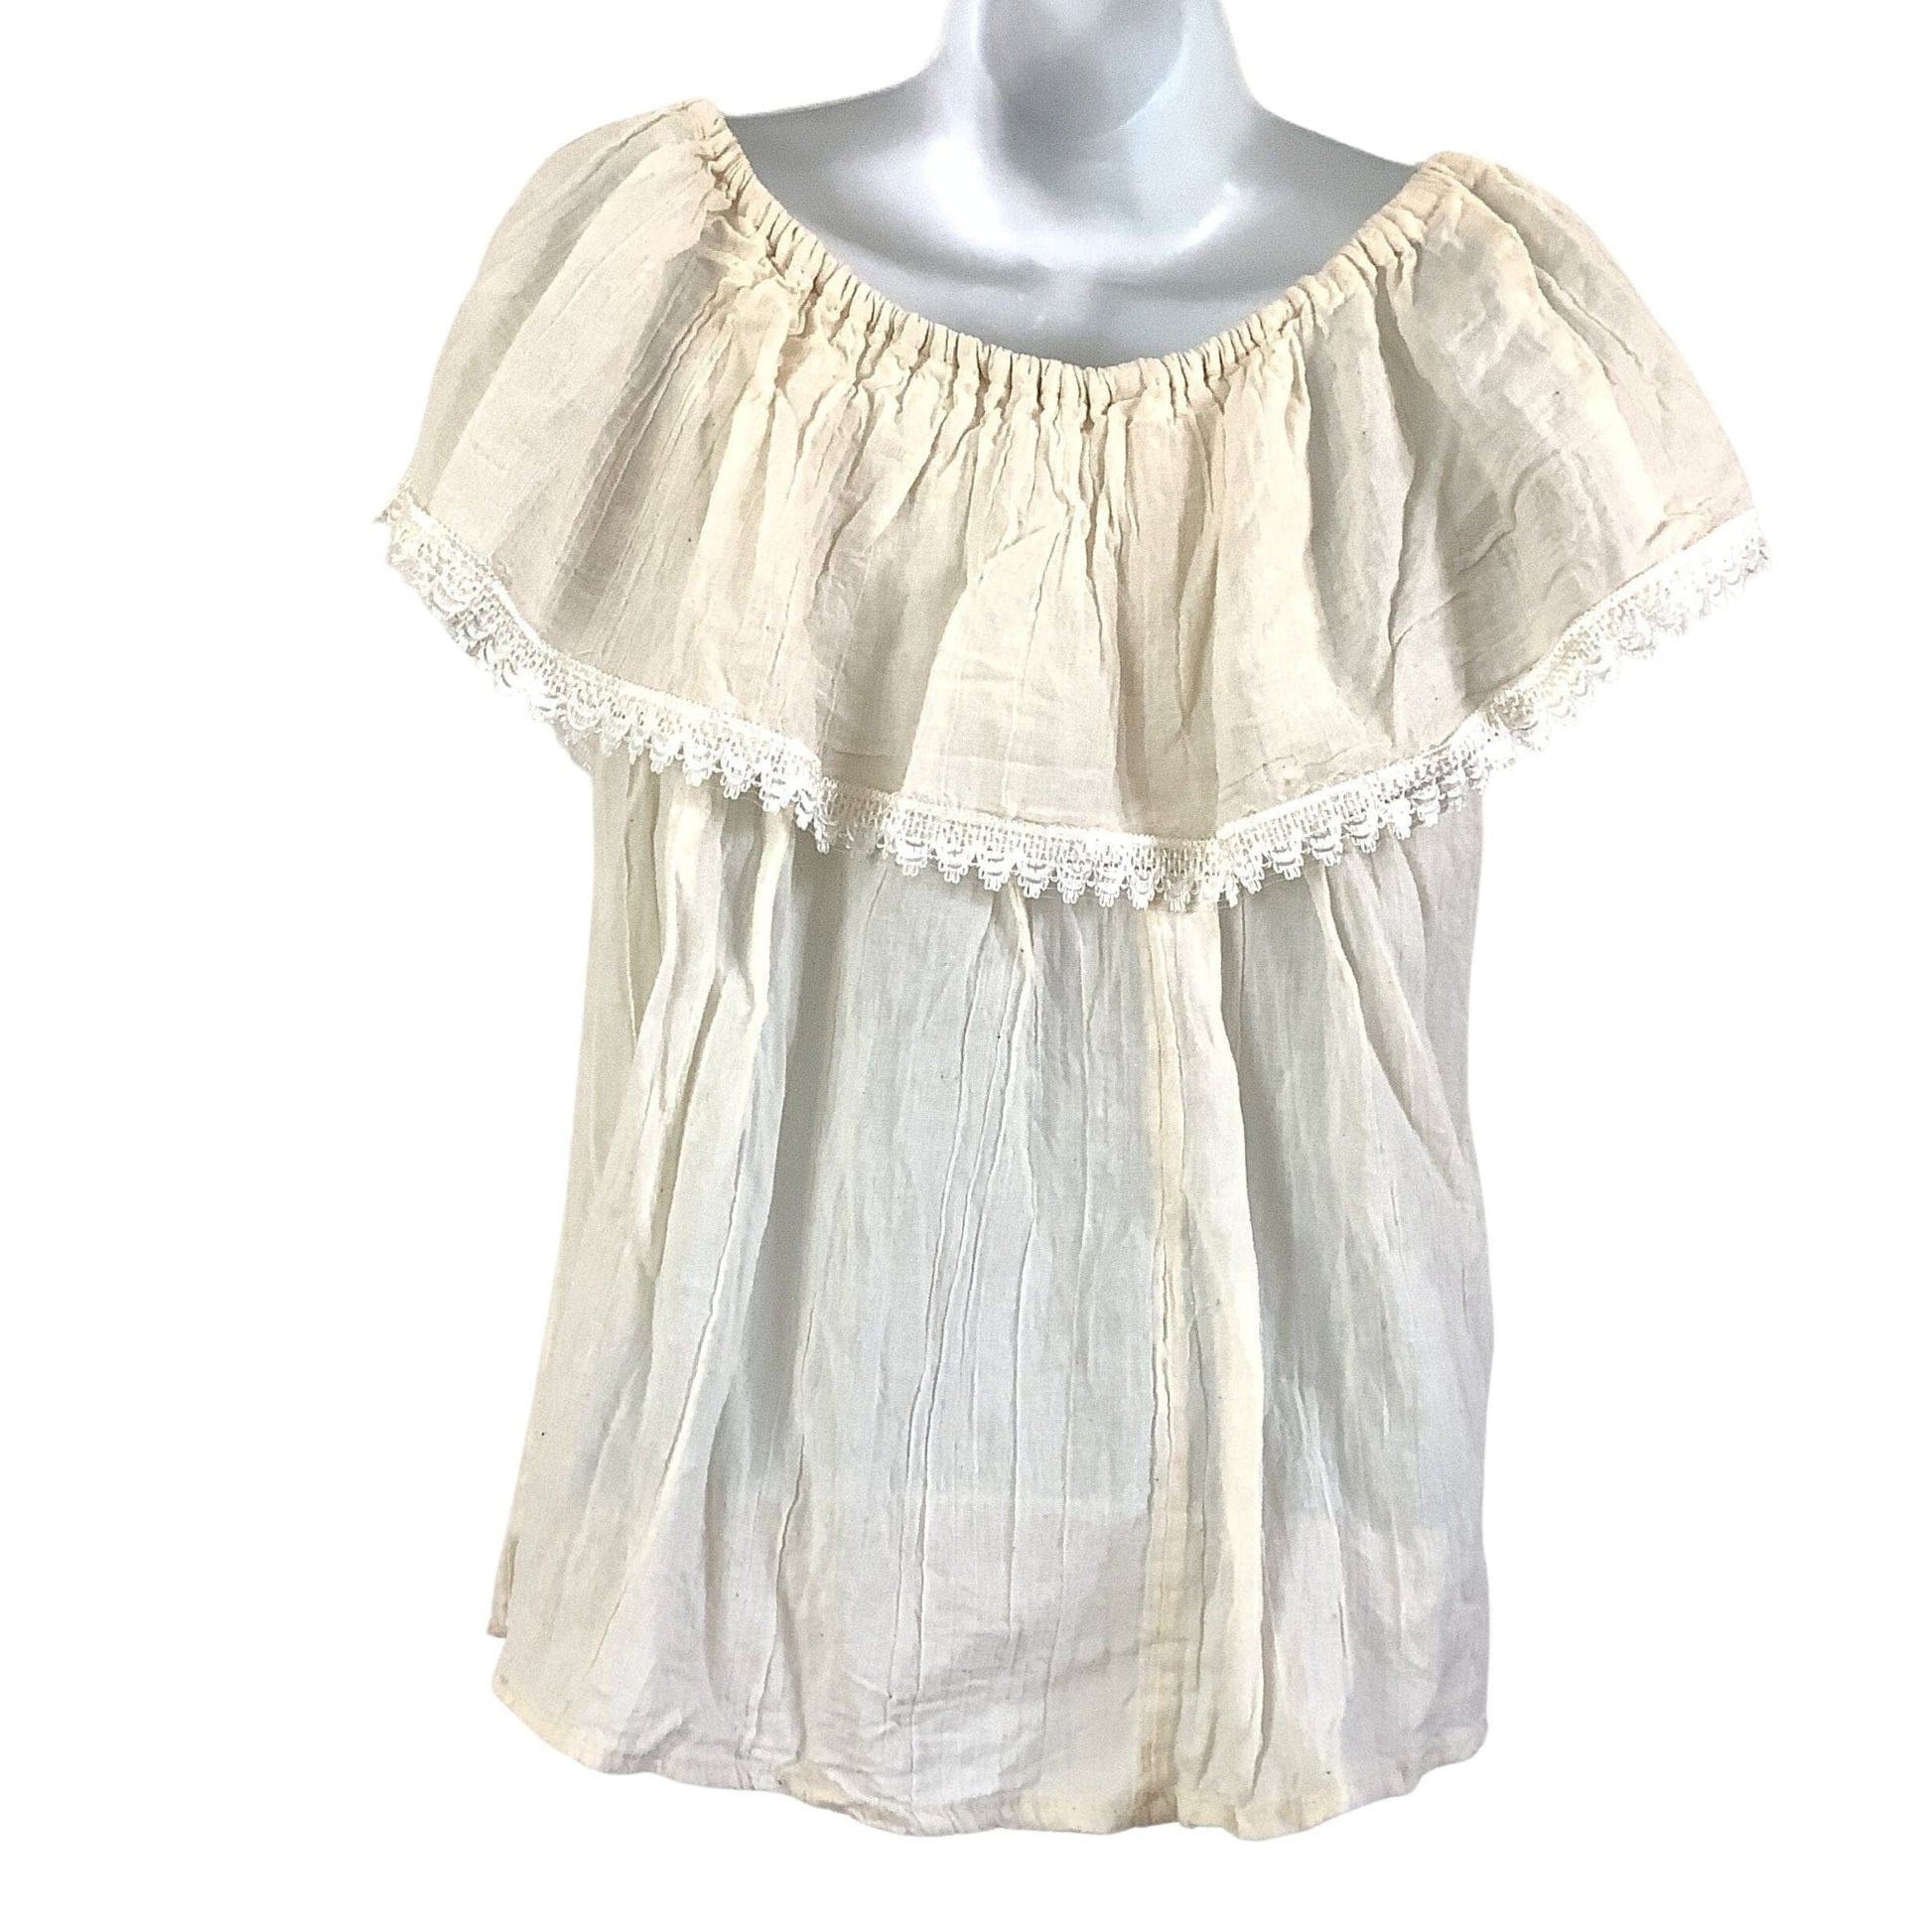 Ethnic Peasant Blouse Small / Beige / Vintage 1980s